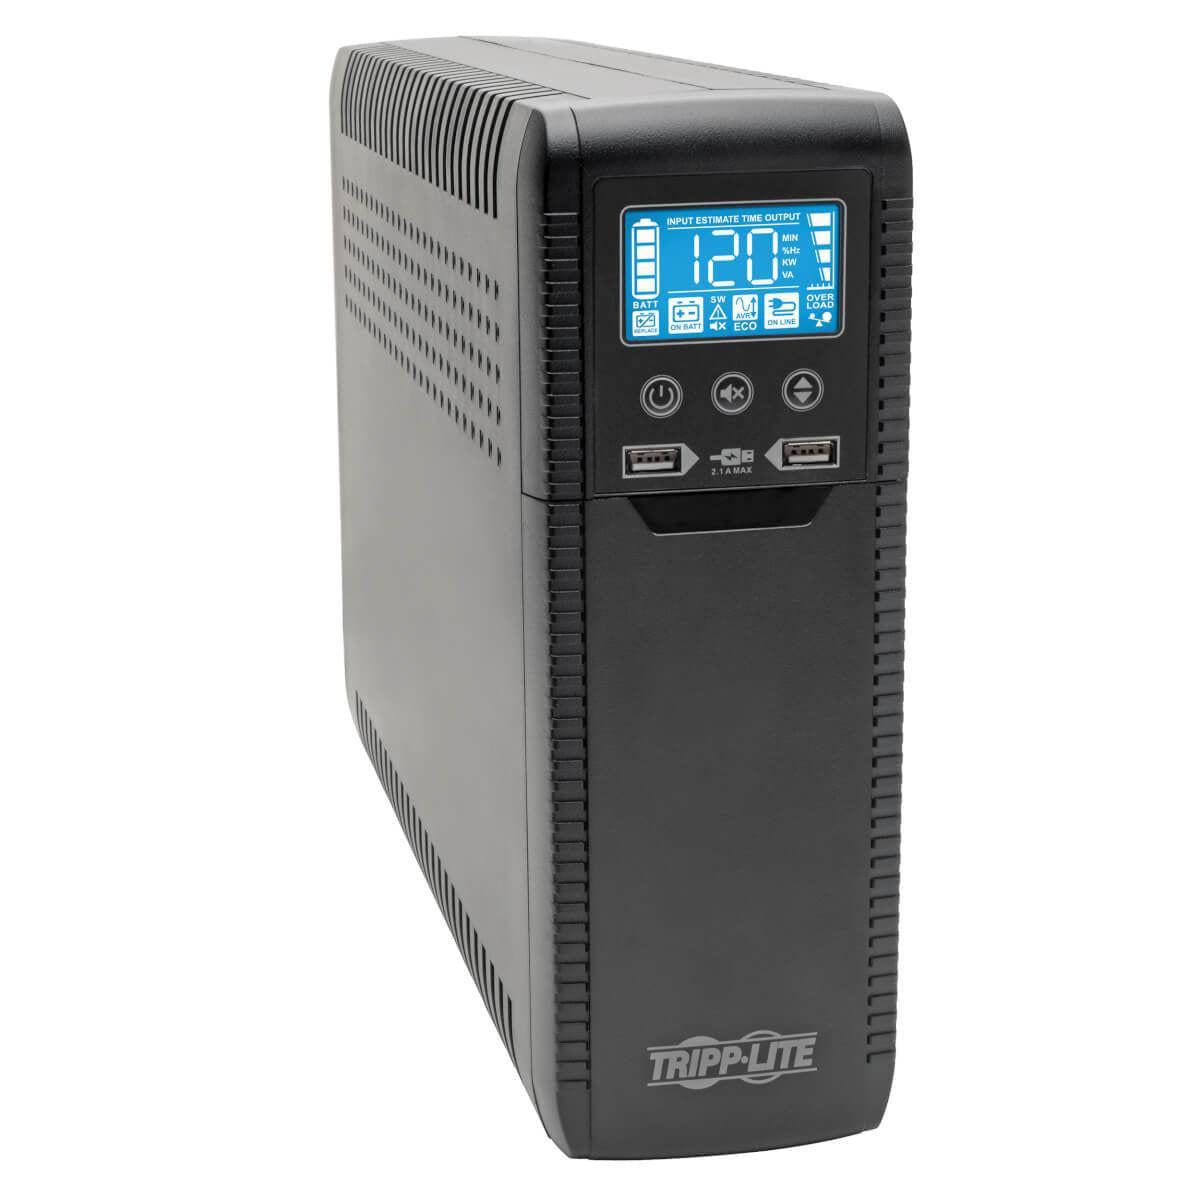 Tripp Lite Line Interactive Ups With Usb And 10 Outlets - 120V, 1440Va, 900W, 50/60 Hz, Avr, Eco Series, Energy Star